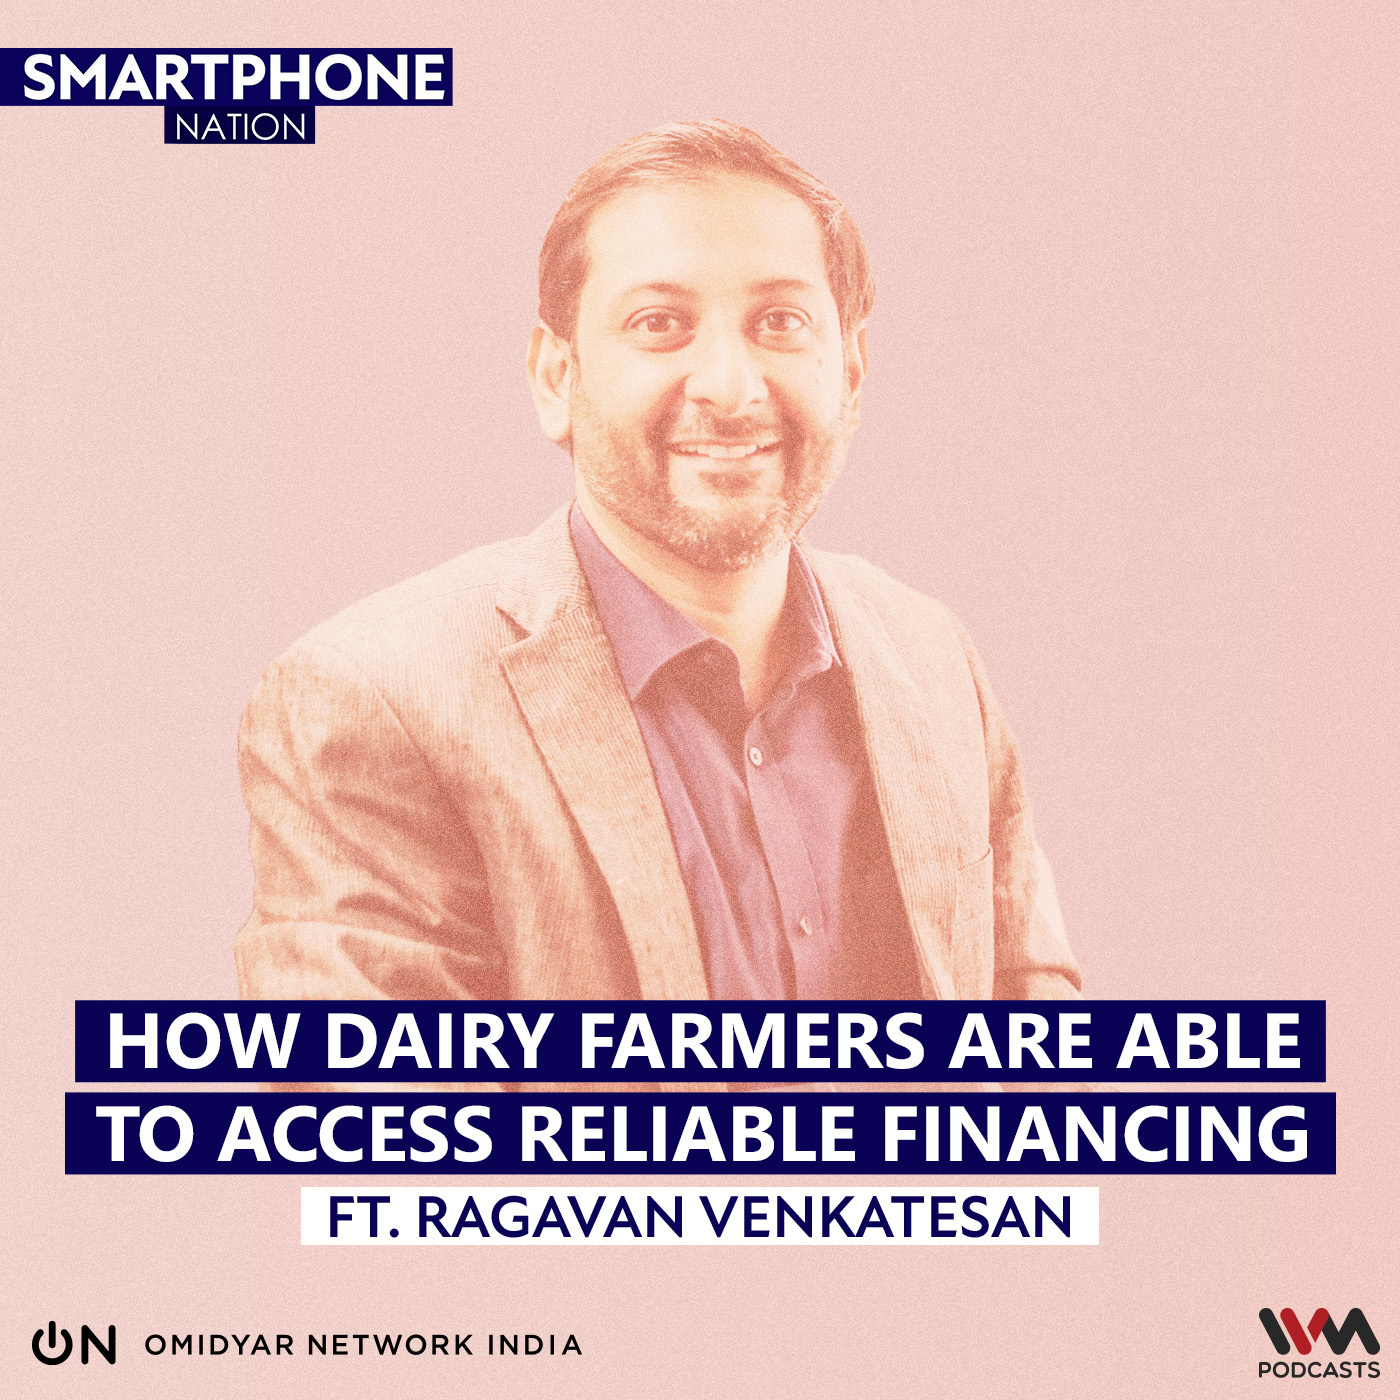 How Dairy Farmers are able to Access Reliable Financing ft. Ragavan Venkatesan